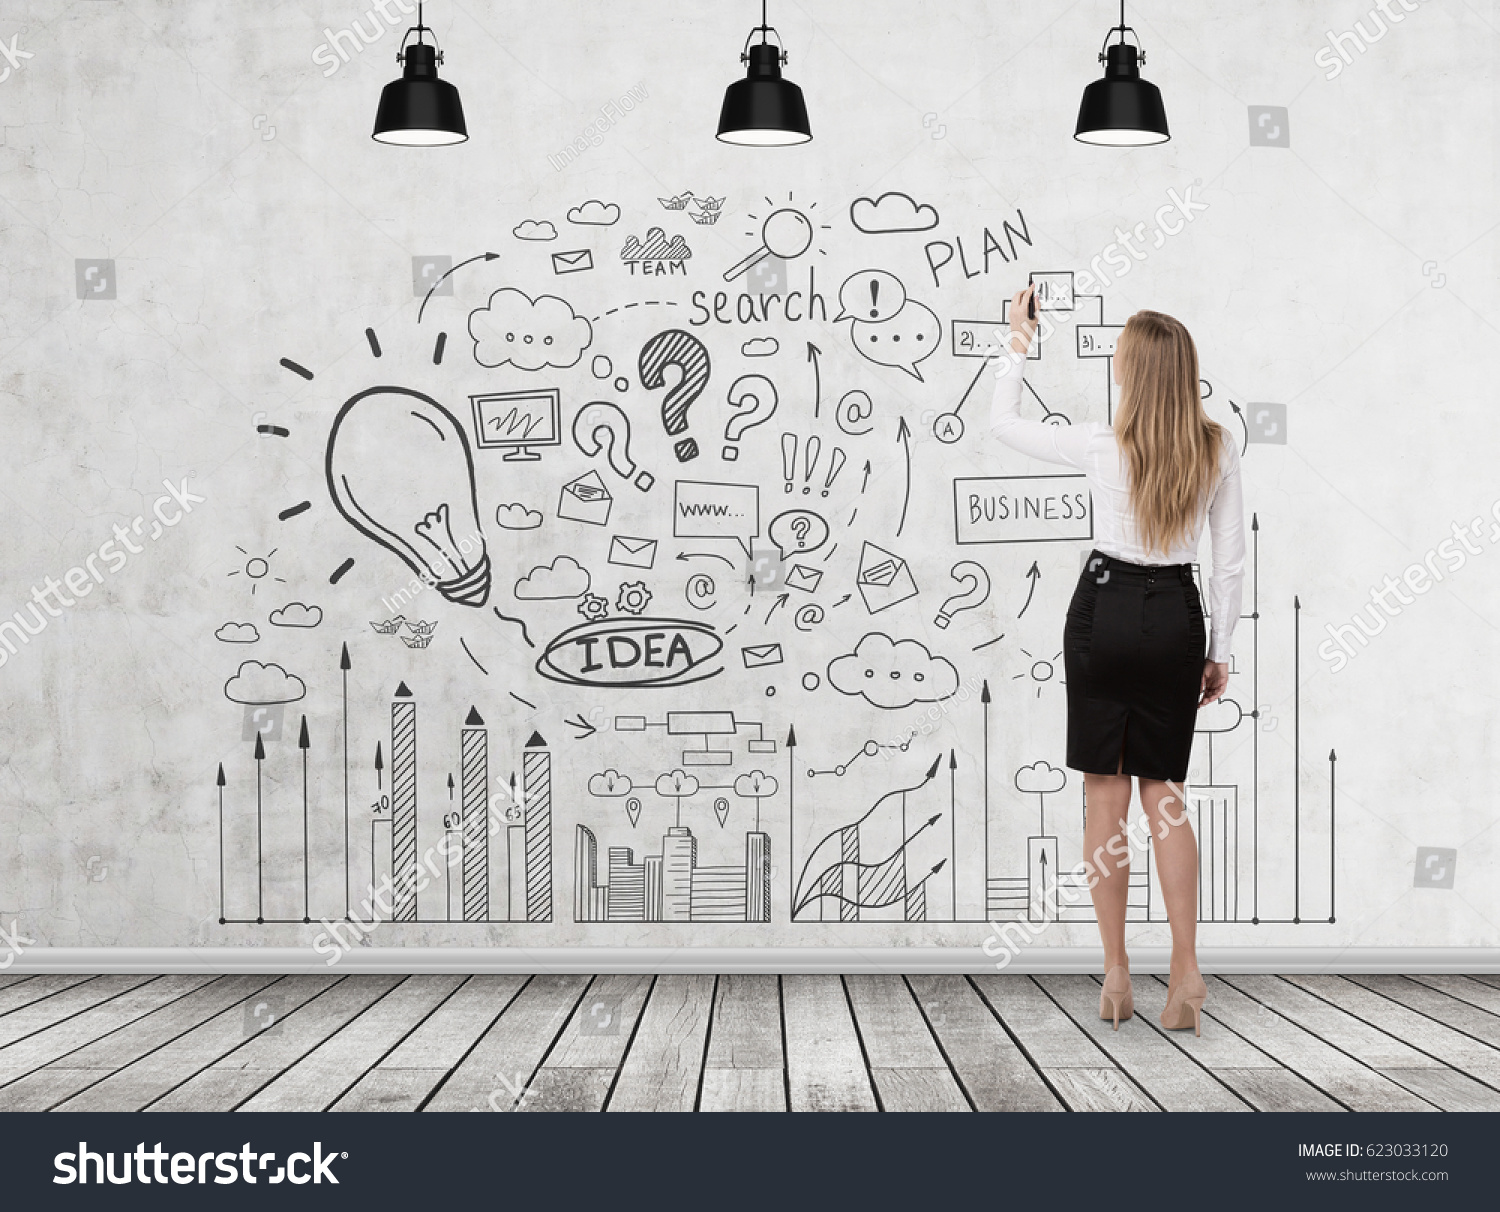 Rear view of a blond businesswoman wearing a black skirt drawing a business idea sketch on a concrete wall in a room with a wooden floor. #623033120